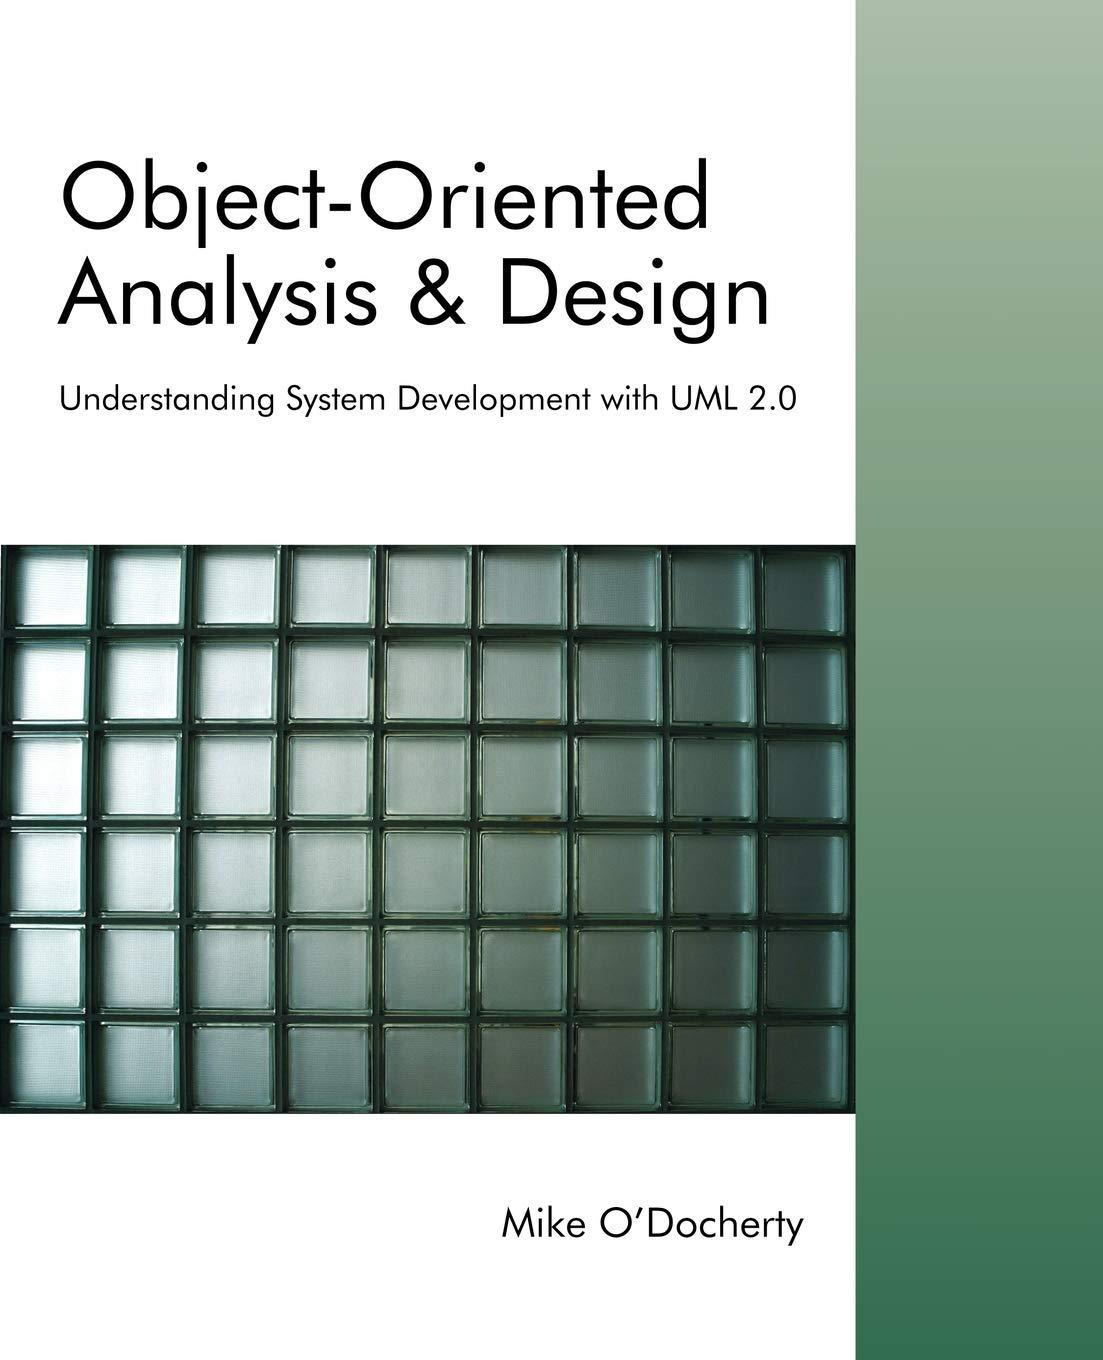 object oriented analysis and design understanding system development with uml 2 0 1st edition mike o'docherty